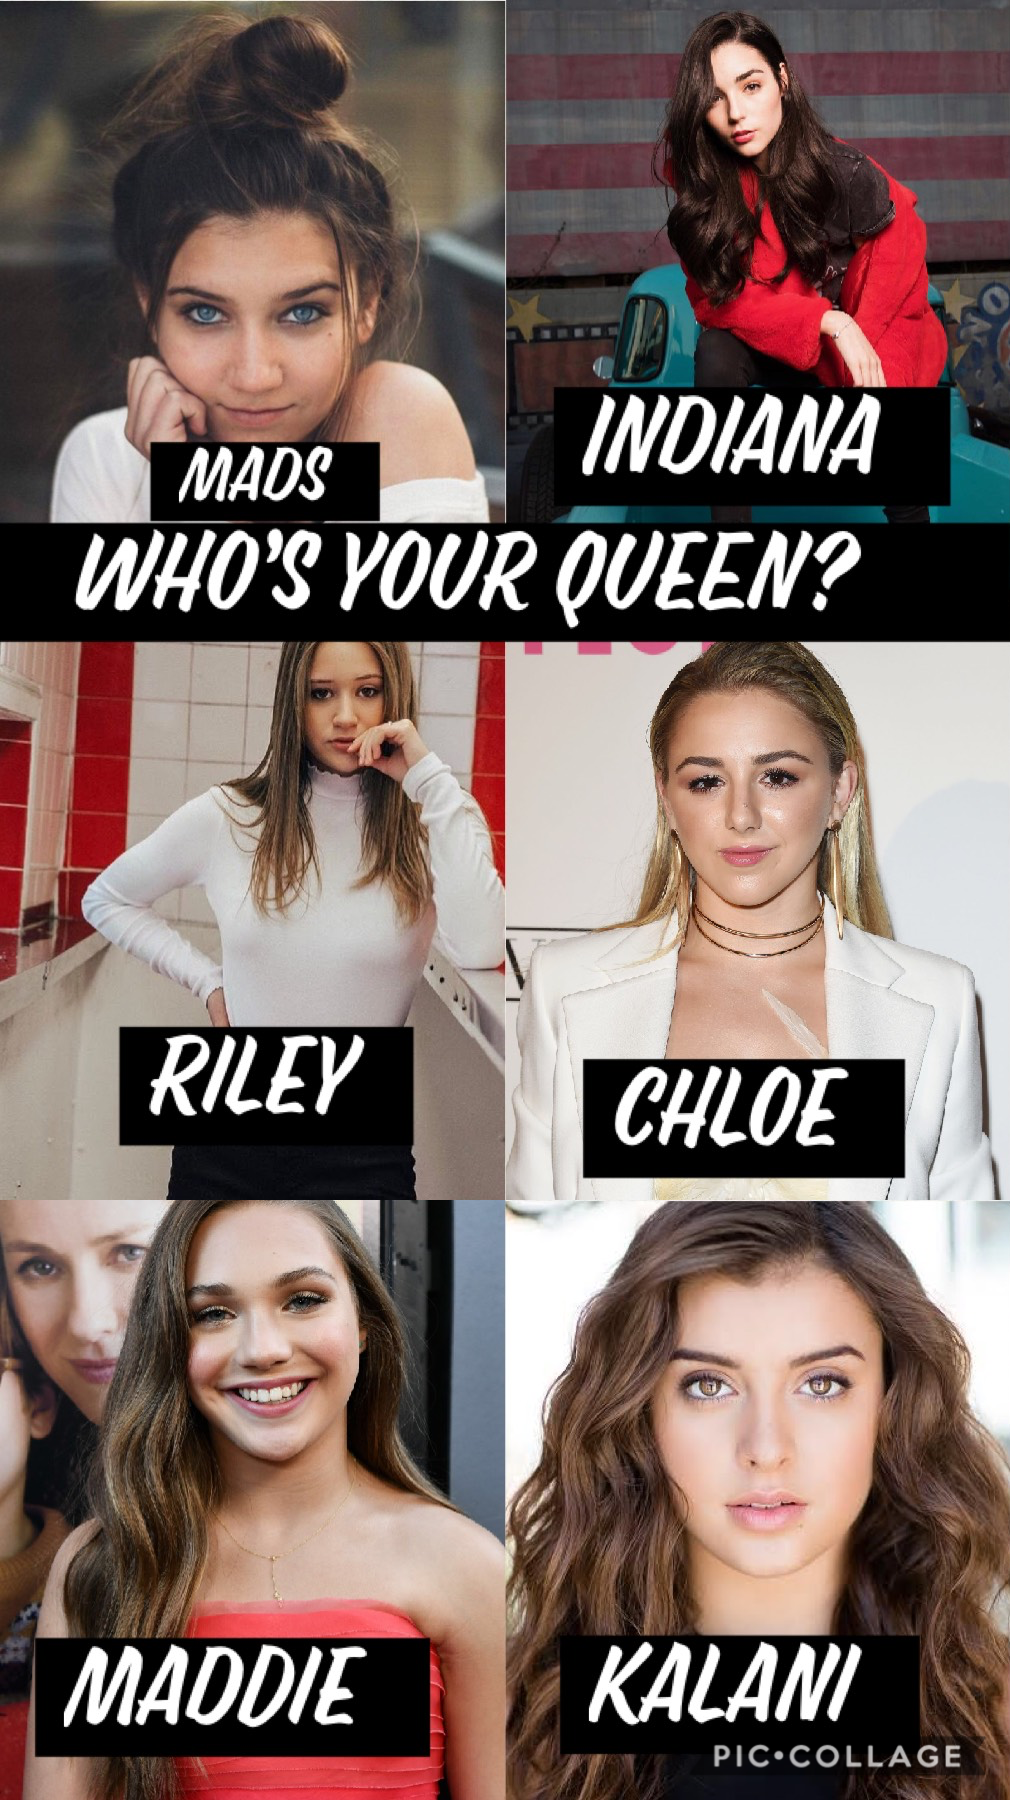 Click for my answer😊

KALANI ALWAYS AND WILL ALWAYS BE MY QUEEN🤩